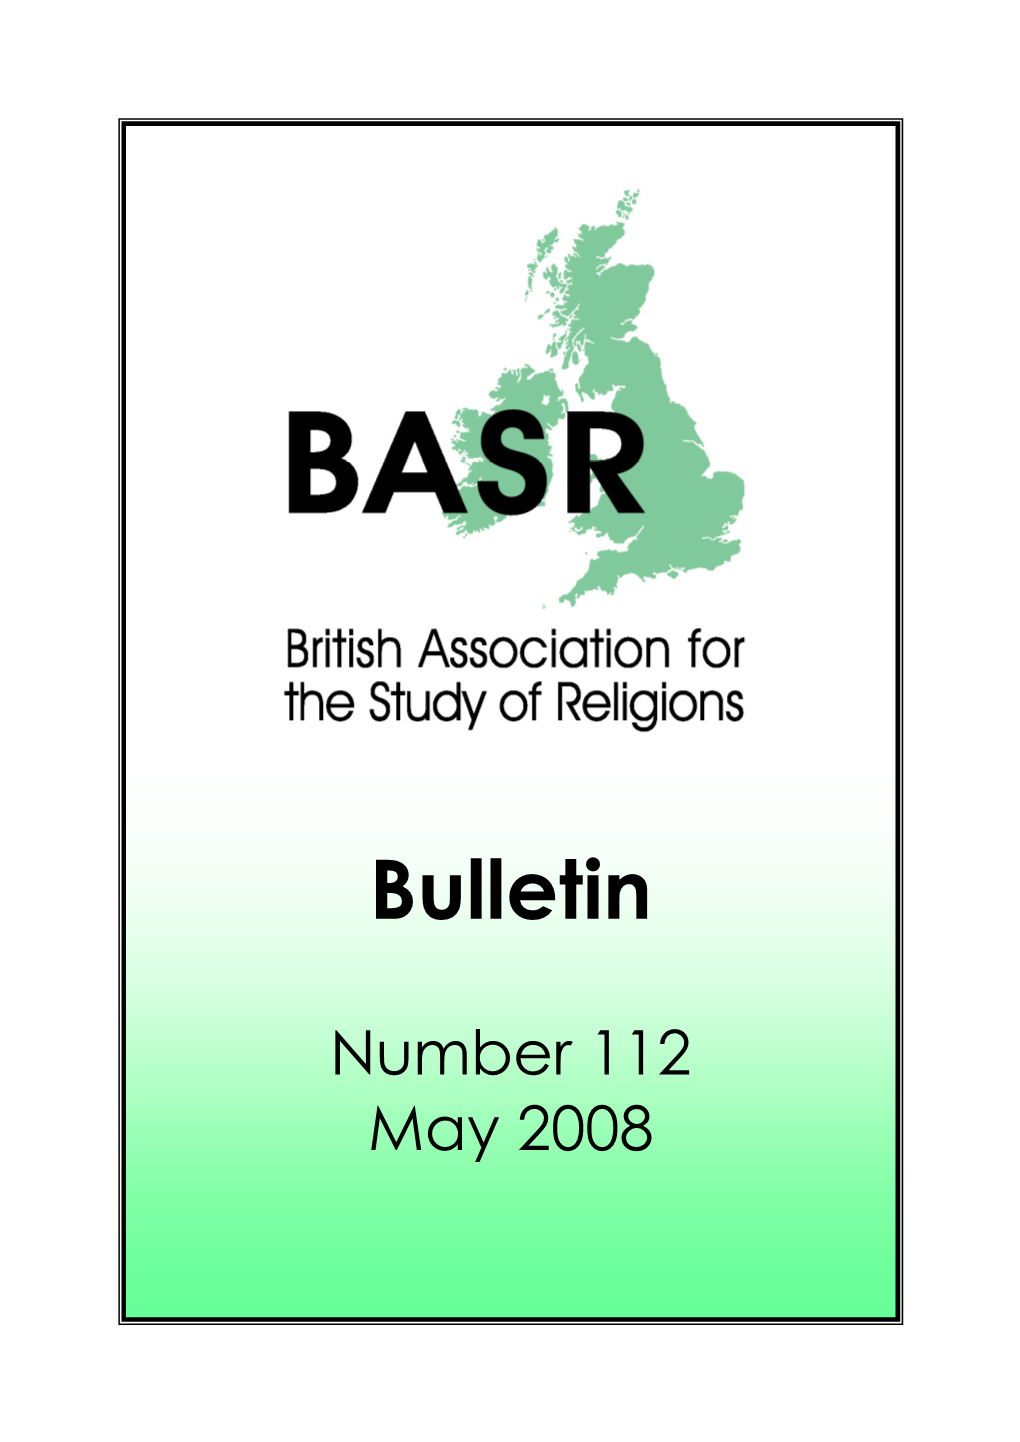 BASR Bulletin Will Carry Notices of Relevant Conferences and Calls for Papers (Up to One Page) Free of Charge